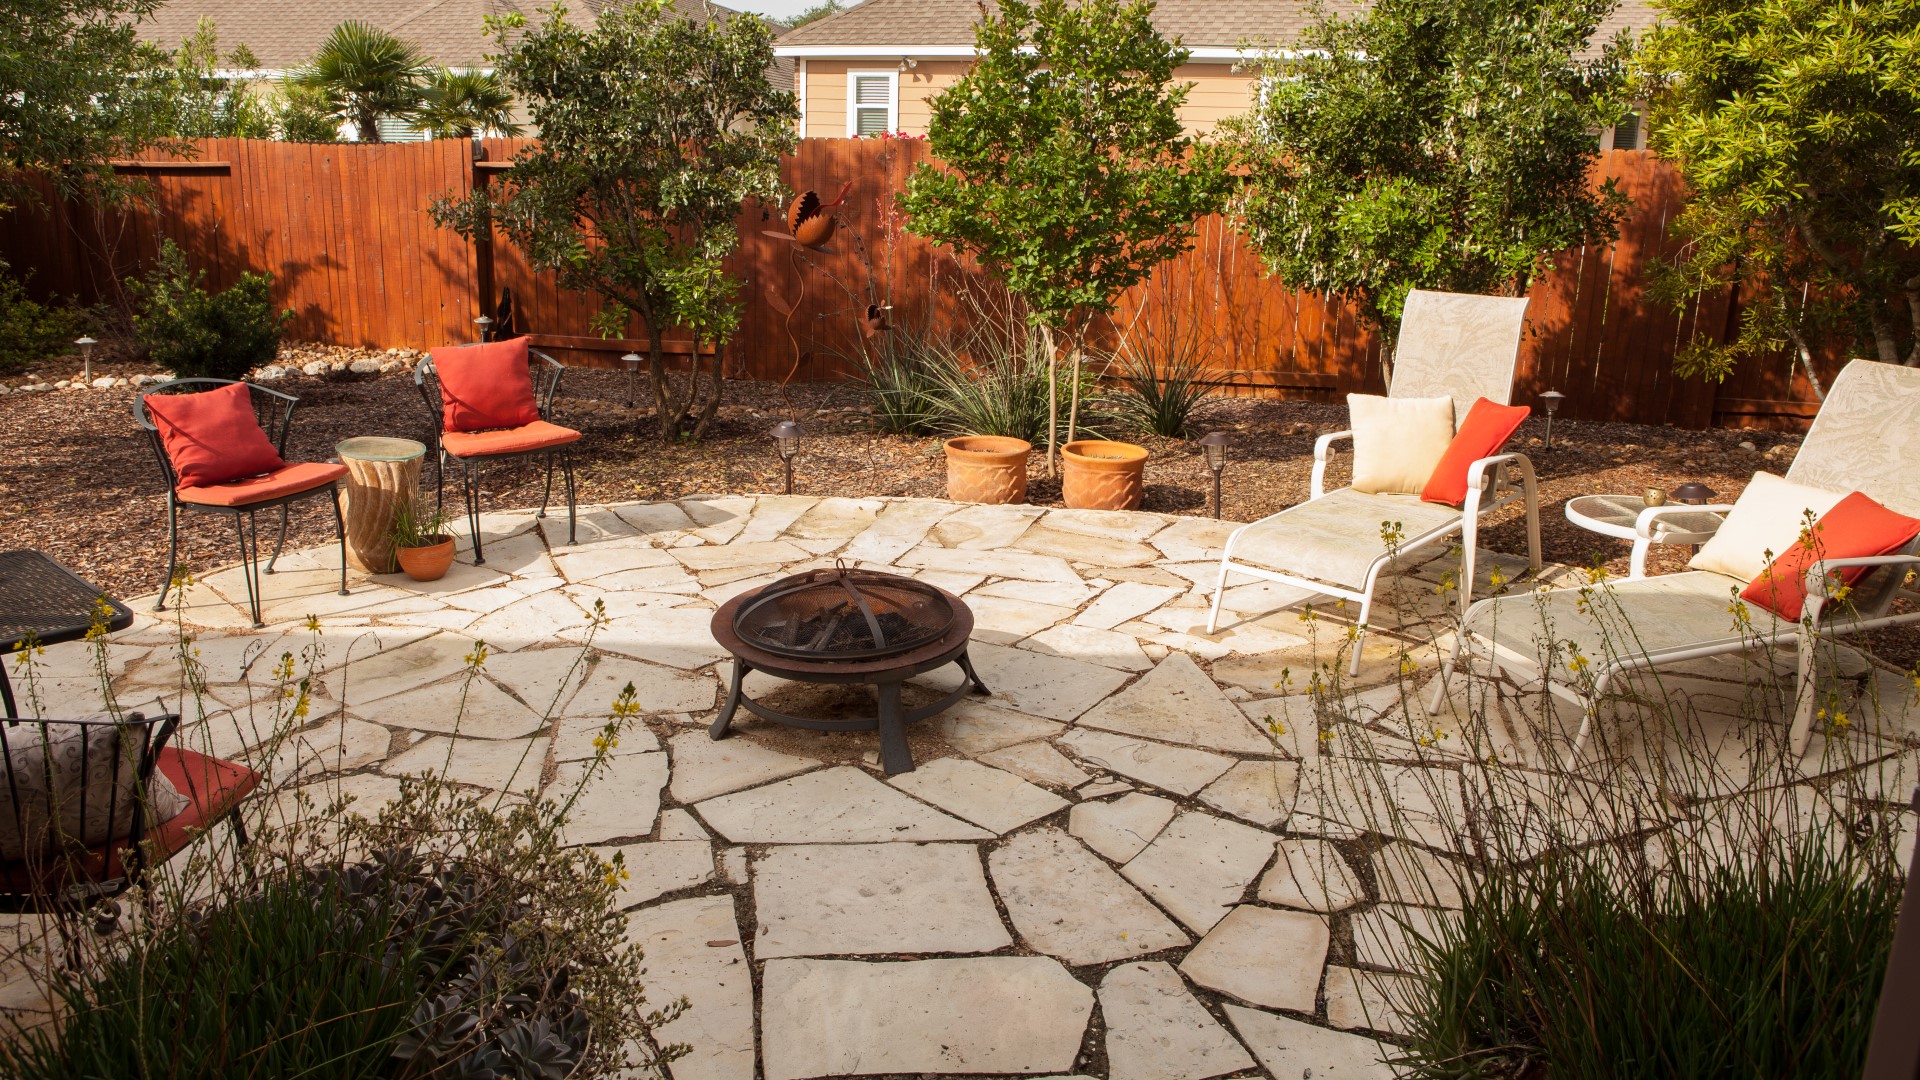 Flagstone patio with firebowl expands backyard living space.